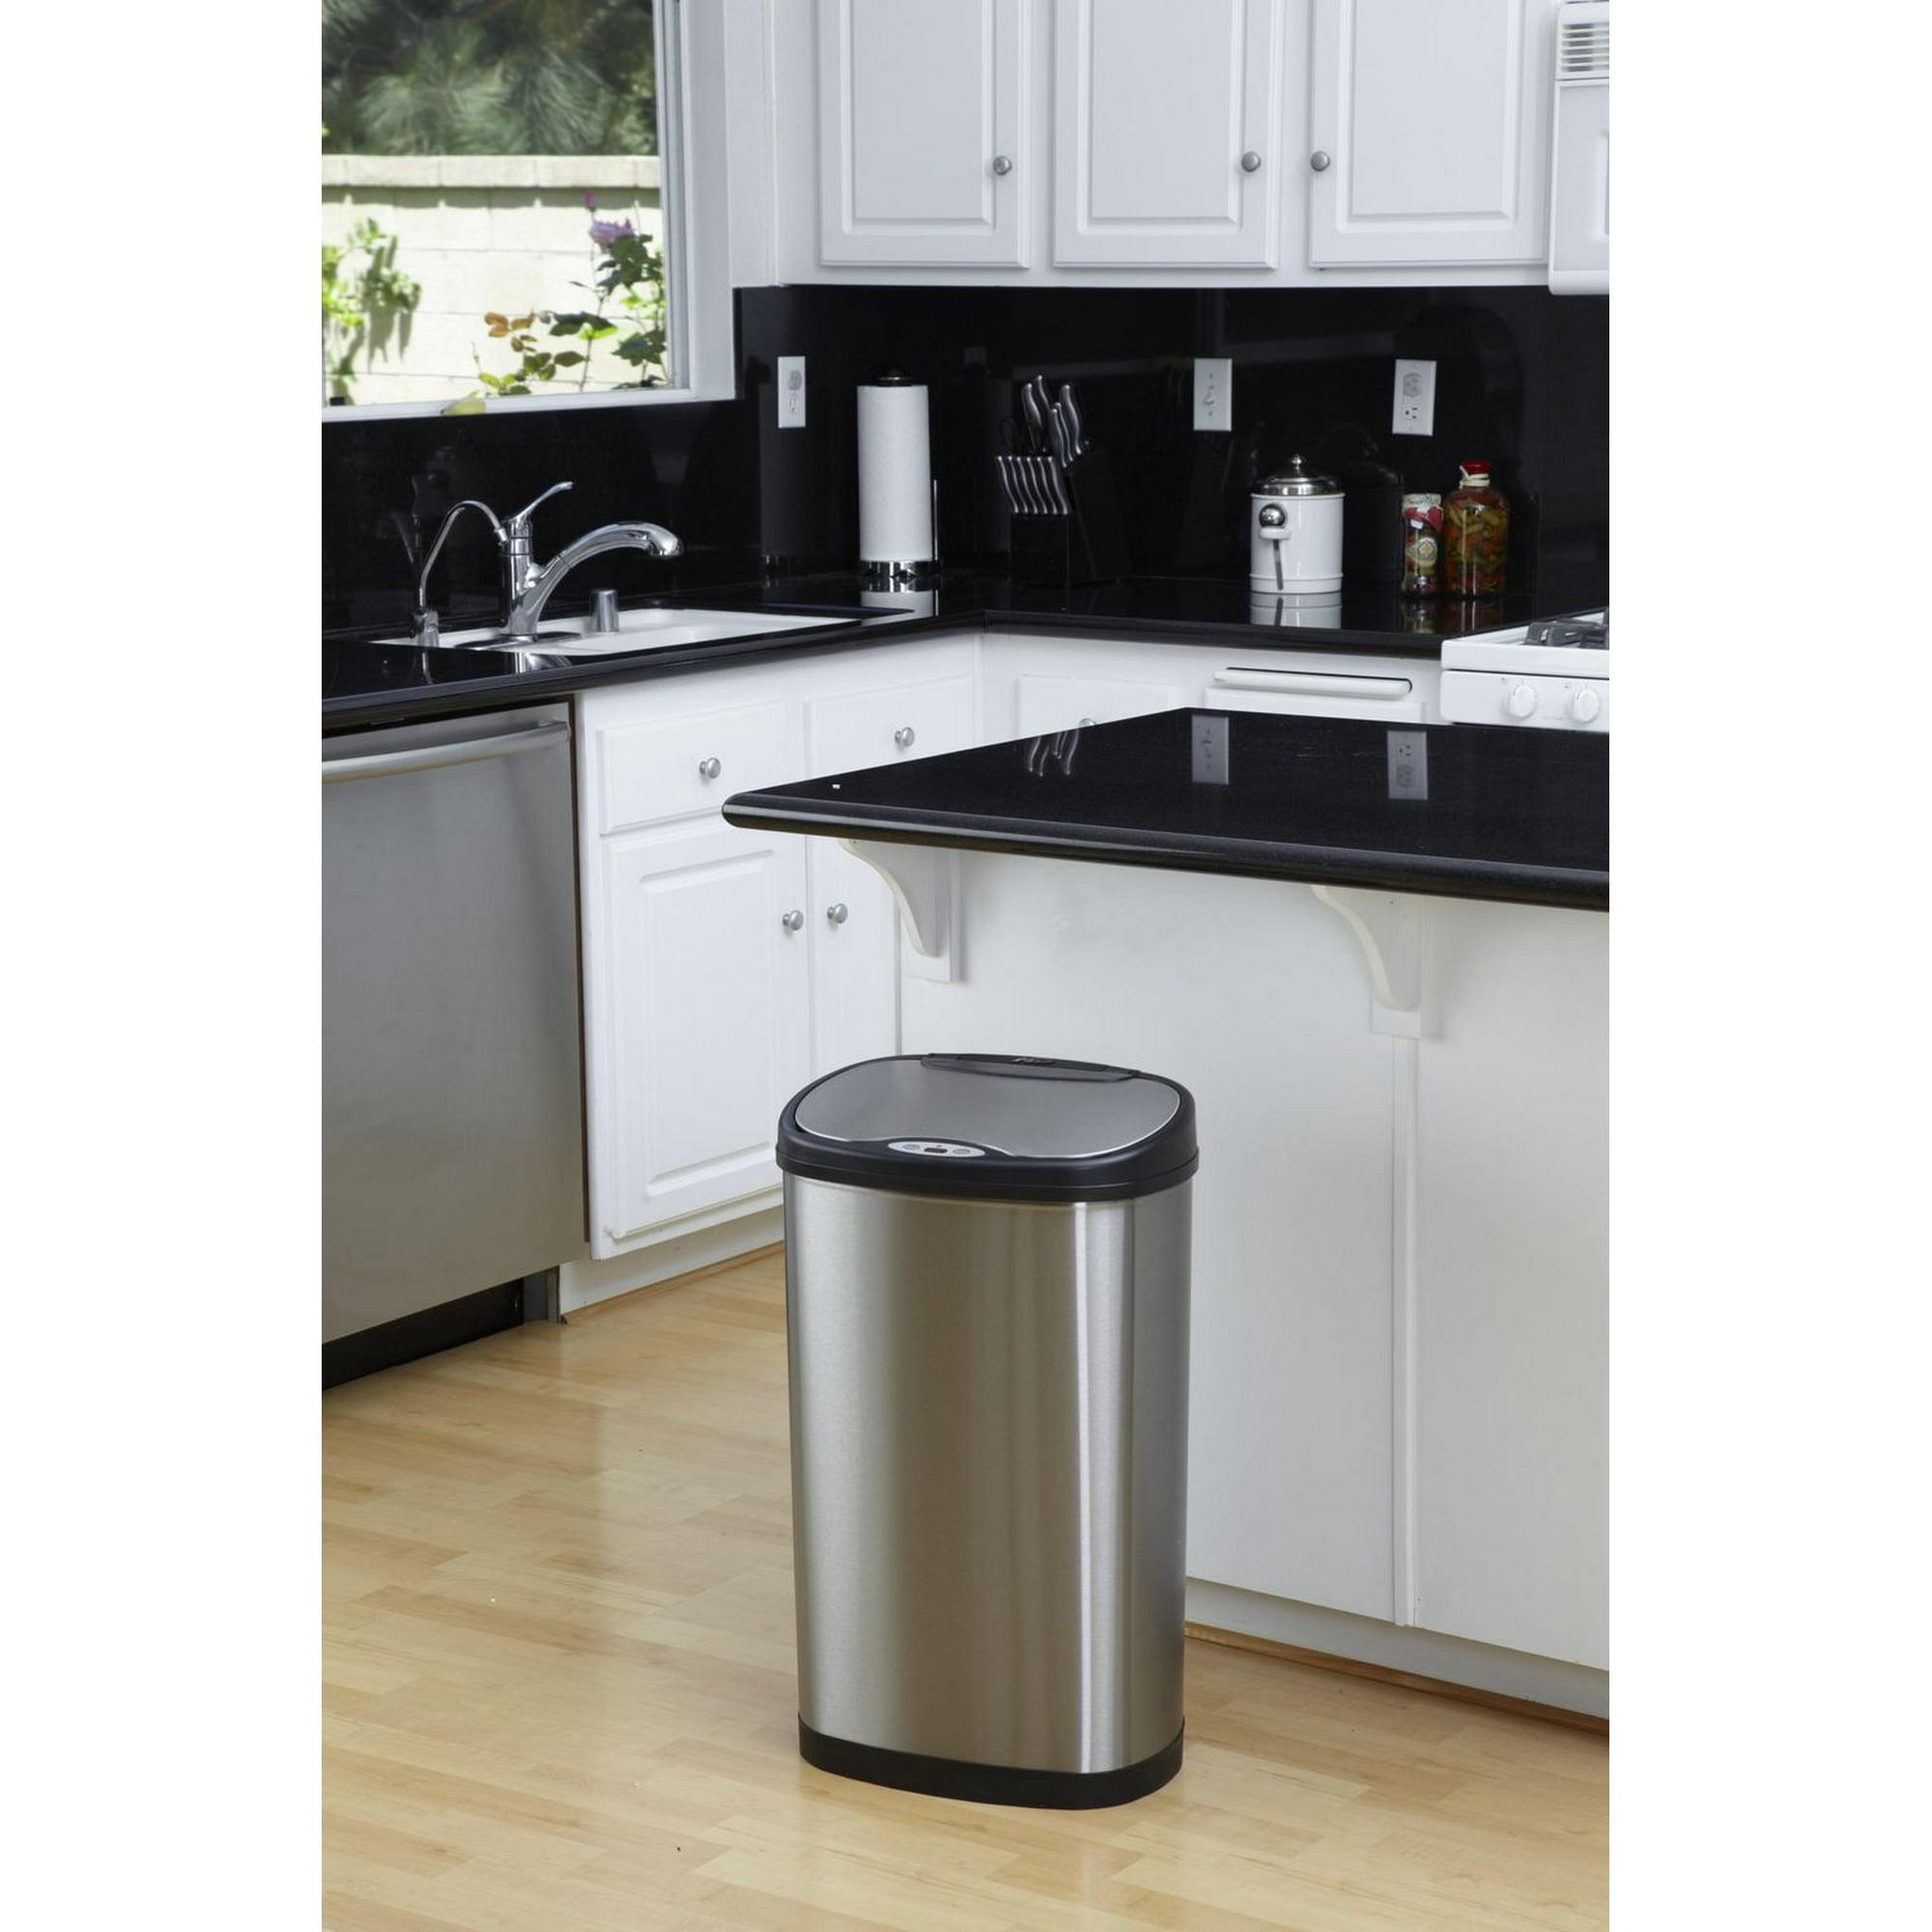 Nine Stars 13-Gallon Motion Sensor Touchless Stainless Steel Oval Trash Can  